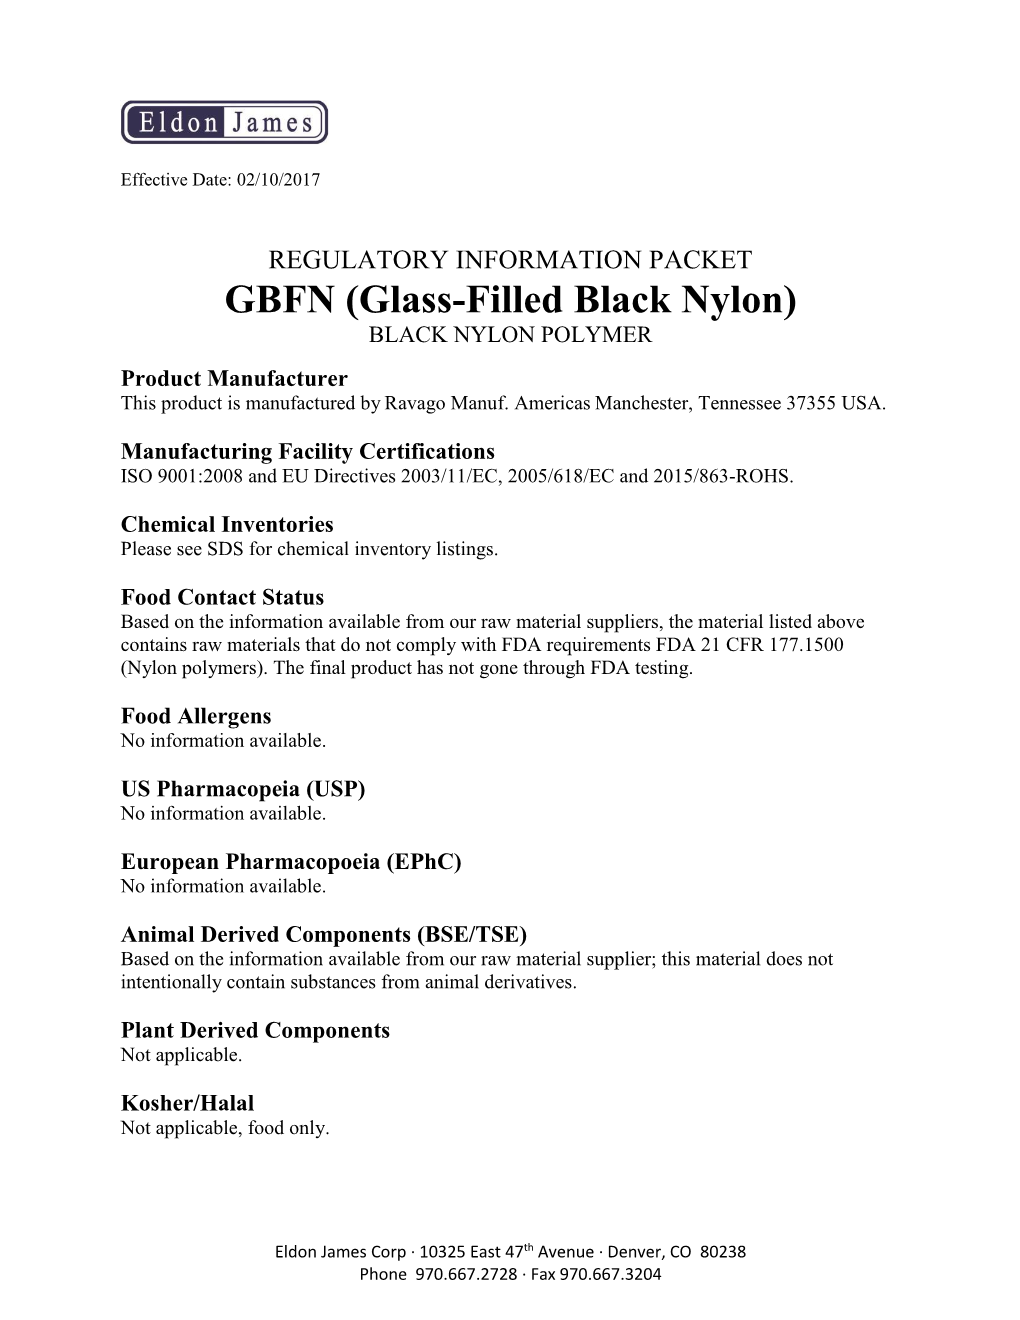 GBFN (Glass-Filled Black Nylon) BLACK NYLON POLYMER Product Manufacturer This Product Is Manufactured by Ravago Manuf